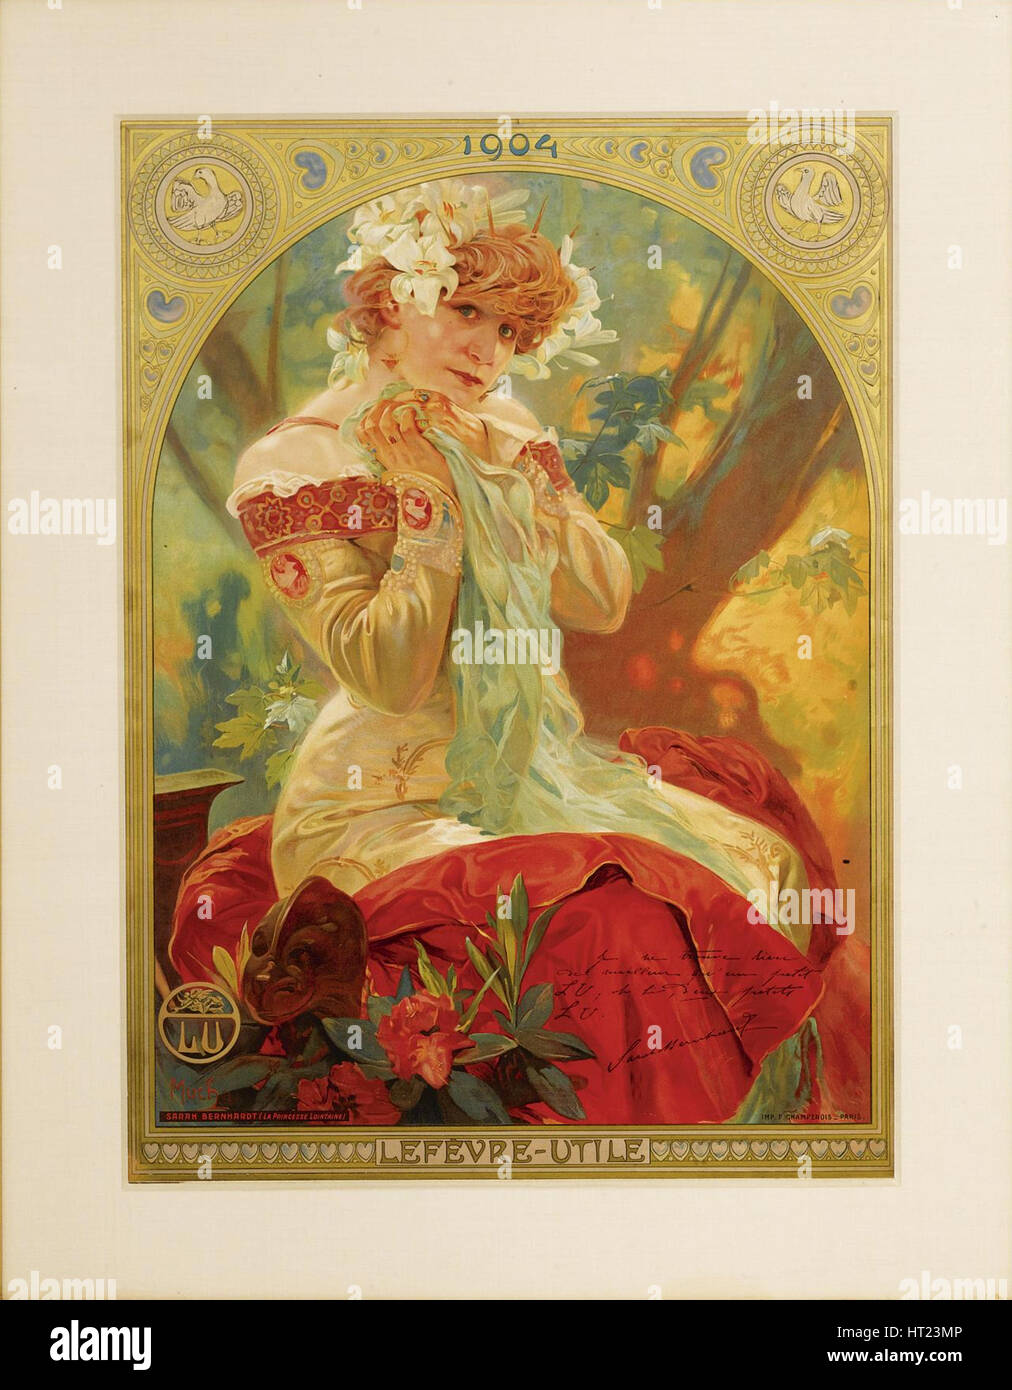 Poster for Lefèvre-Utile. Sarah Bernhardt in the role of Melissinde in La Princesse Lointaine by E Artist: Mucha, Alfons Marie (1860-1939) Stock Photo